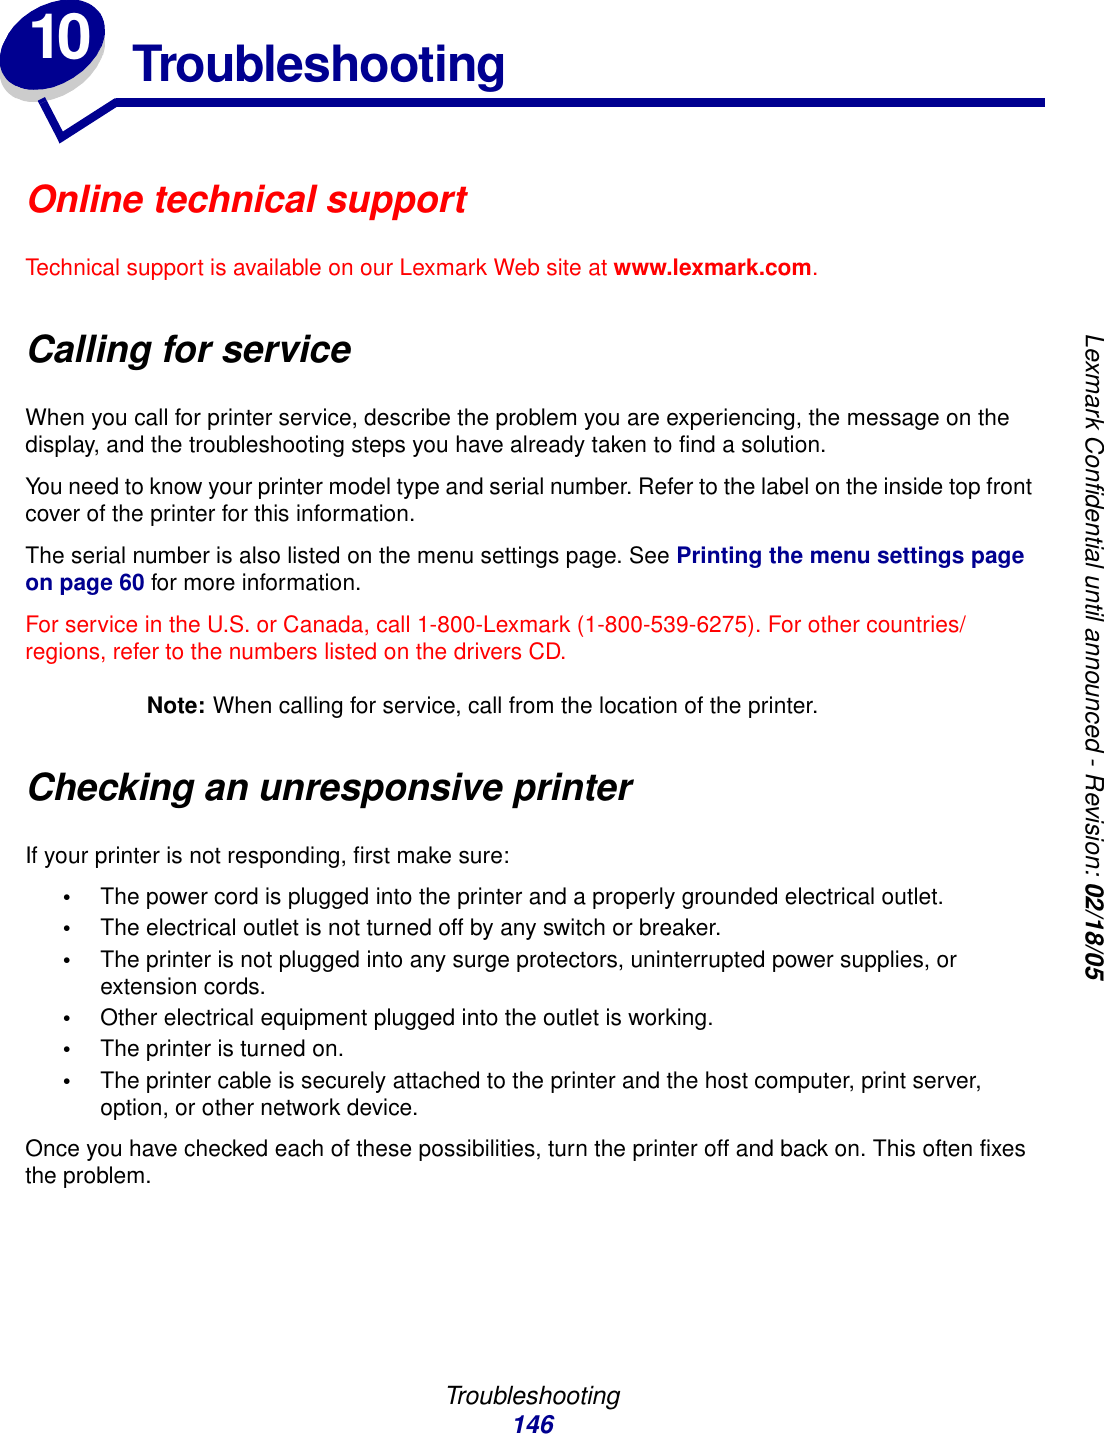 Troubleshooting146Lexmark Confidential until announced - Revision: 02/18/0510 TroubleshootingOnline technical supportTechnical support is available on our Lexmark Web site at www.lexmark.com.Calling for serviceWhen you call for printer service, describe the problem you are experiencing, the message on the display, and the troubleshooting steps you have already taken to find a solution.You need to know your printer model type and serial number. Refer to the label on the inside top front cover of the printer for this information.The serial number is also listed on the menu settings page. See Printing the menu settings page on page 60 for more information.For service in the U.S. or Canada, call 1-800-Lexmark (1-800-539-6275). For other countries/regions, refer to the numbers listed on the drivers CD.Note: When calling for service, call from the location of the printer.Checking an unresponsive printerIf your printer is not responding, first make sure:•The power cord is plugged into the printer and a properly grounded electrical outlet.•The electrical outlet is not turned off by any switch or breaker.•The printer is not plugged into any surge protectors, uninterrupted power supplies, or extension cords.•Other electrical equipment plugged into the outlet is working.•The printer is turned on.•The printer cable is securely attached to the printer and the host computer, print server, option, or other network device.Once you have checked each of these possibilities, turn the printer off and back on. This often fixes the problem.